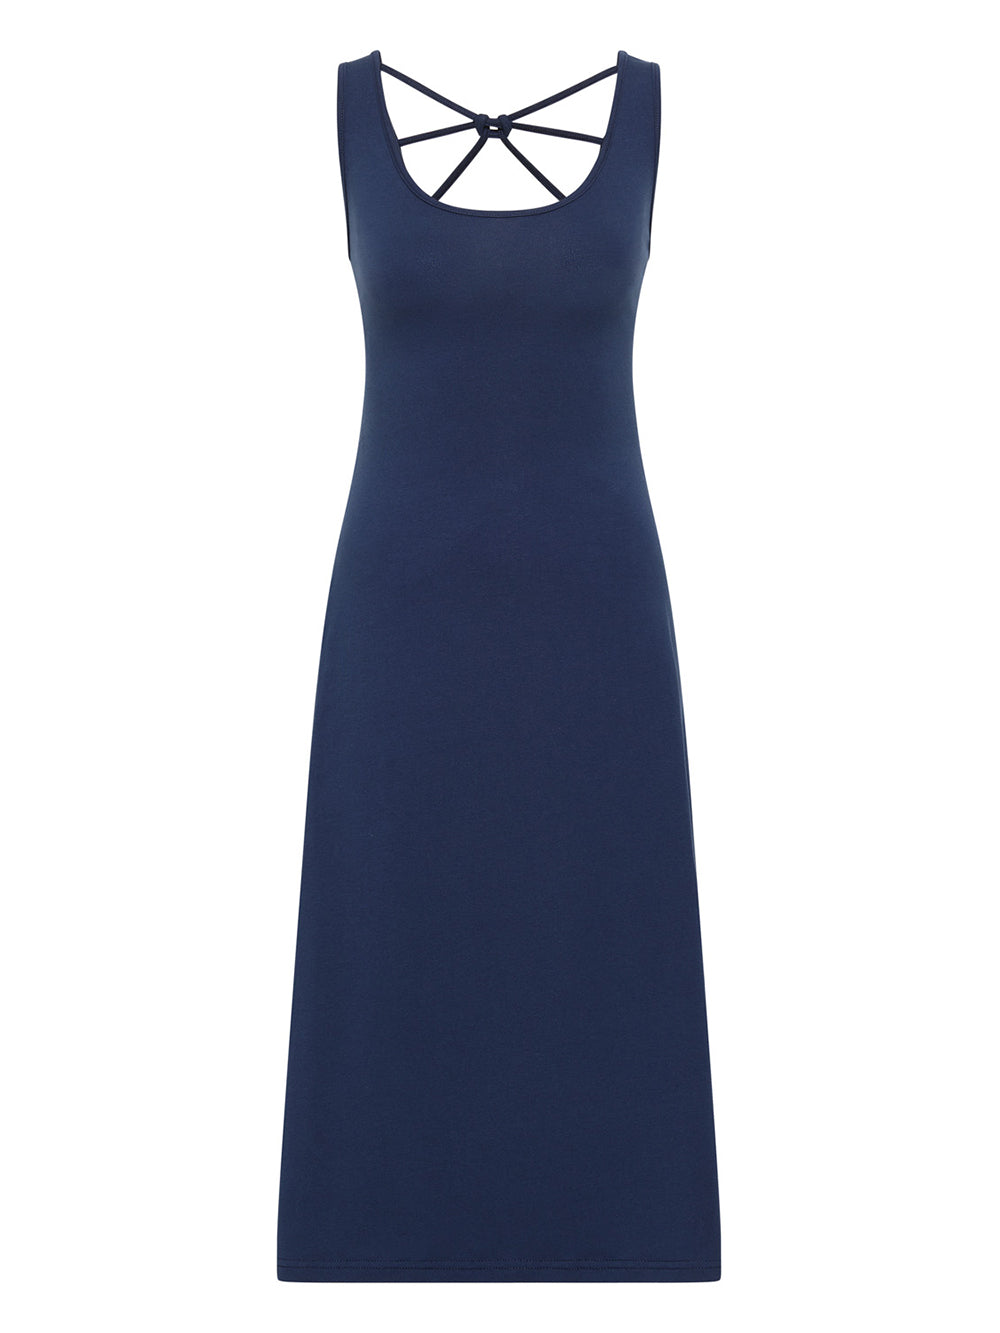 Dress with back details deep navy